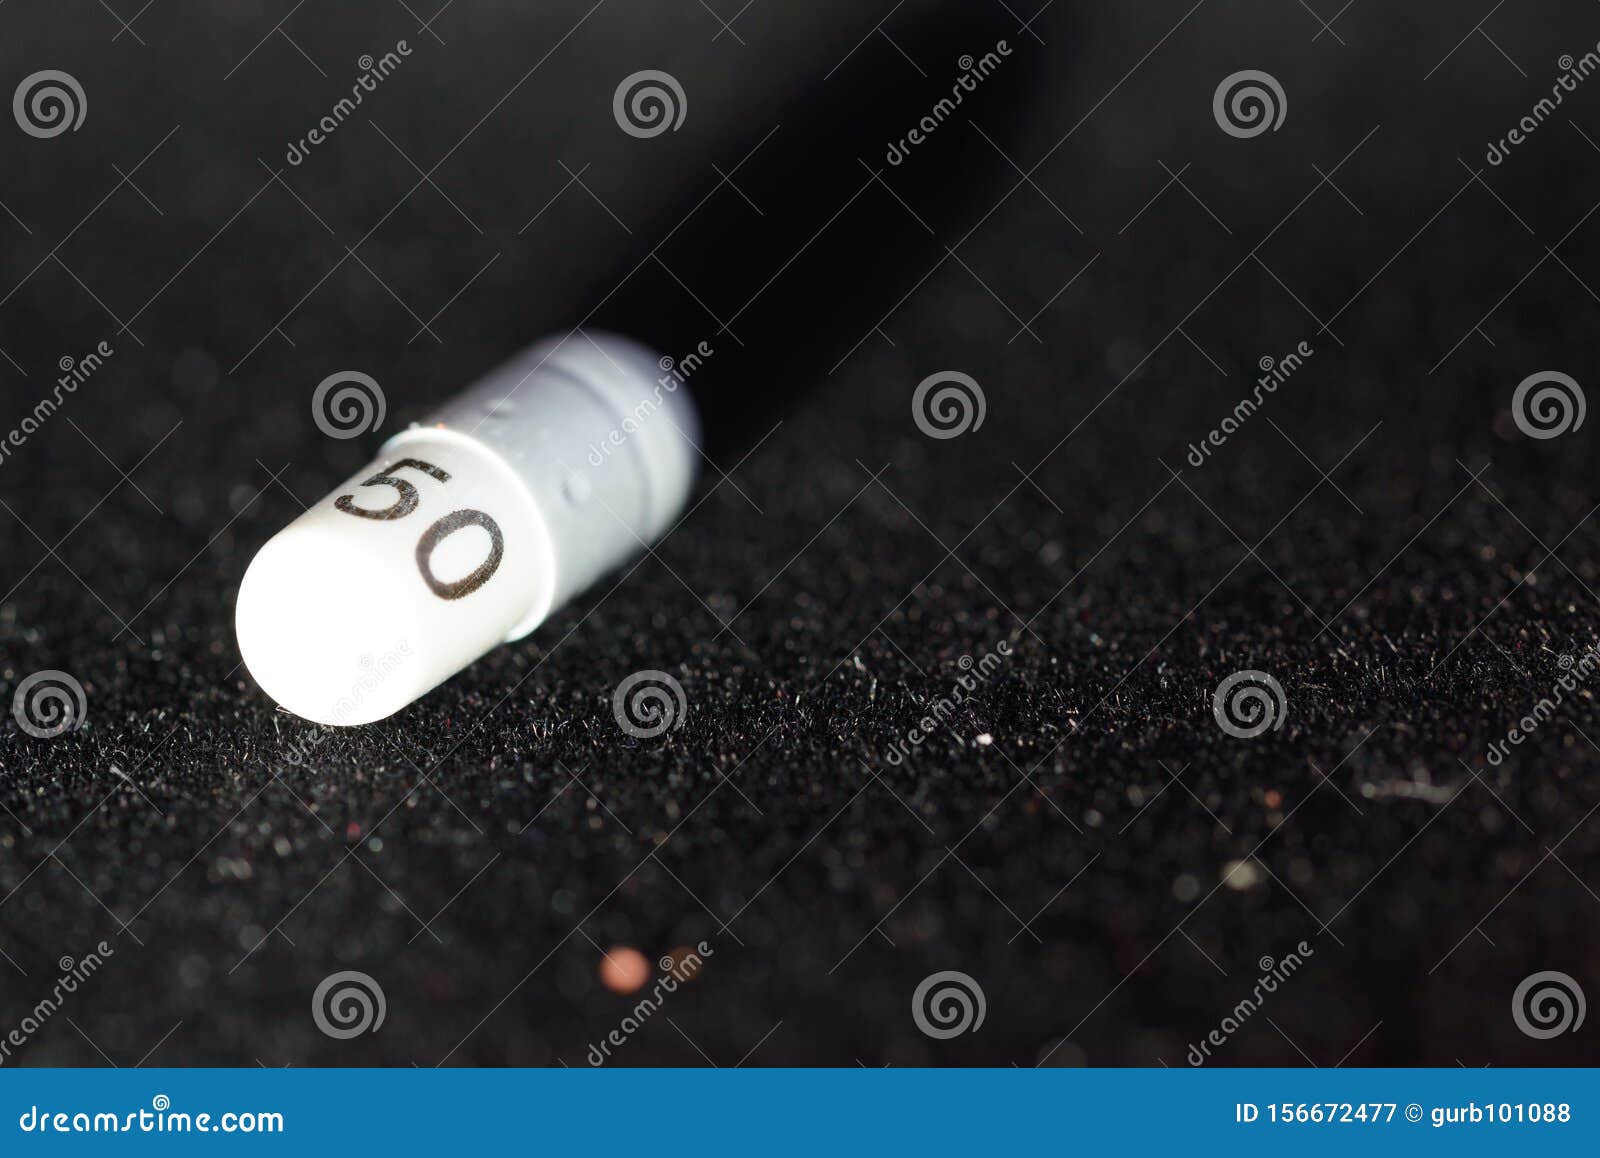 white and grey capsules with 50 number